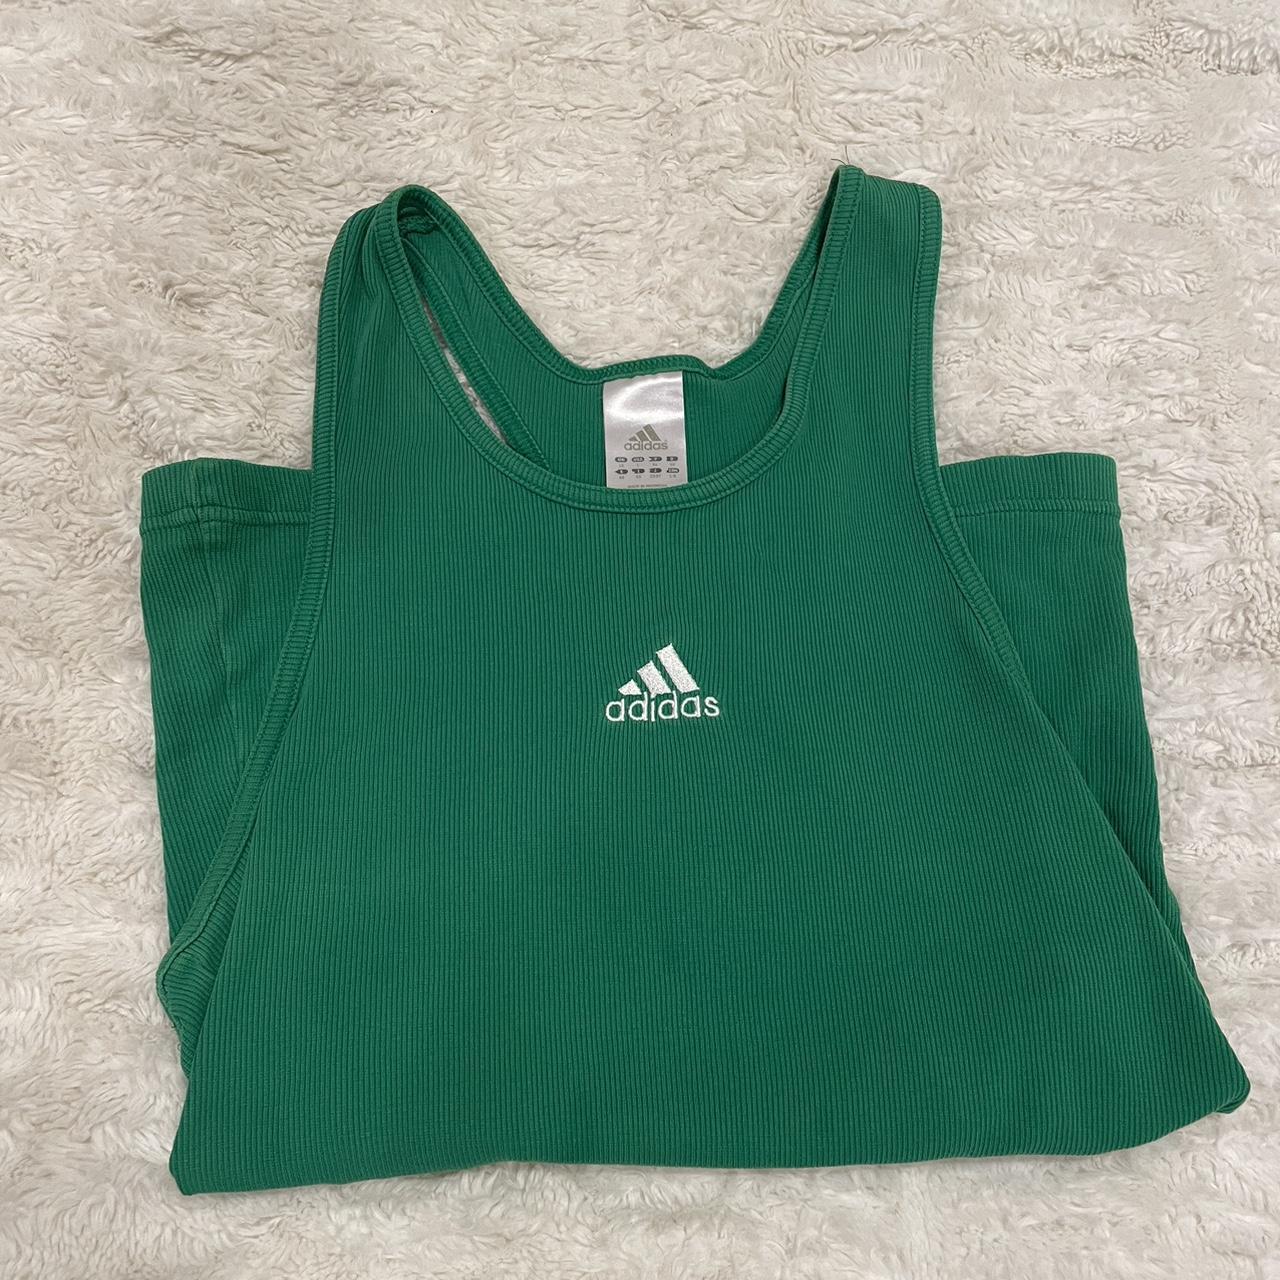 neon green adidas crop top tag size xs pit to pit - Depop